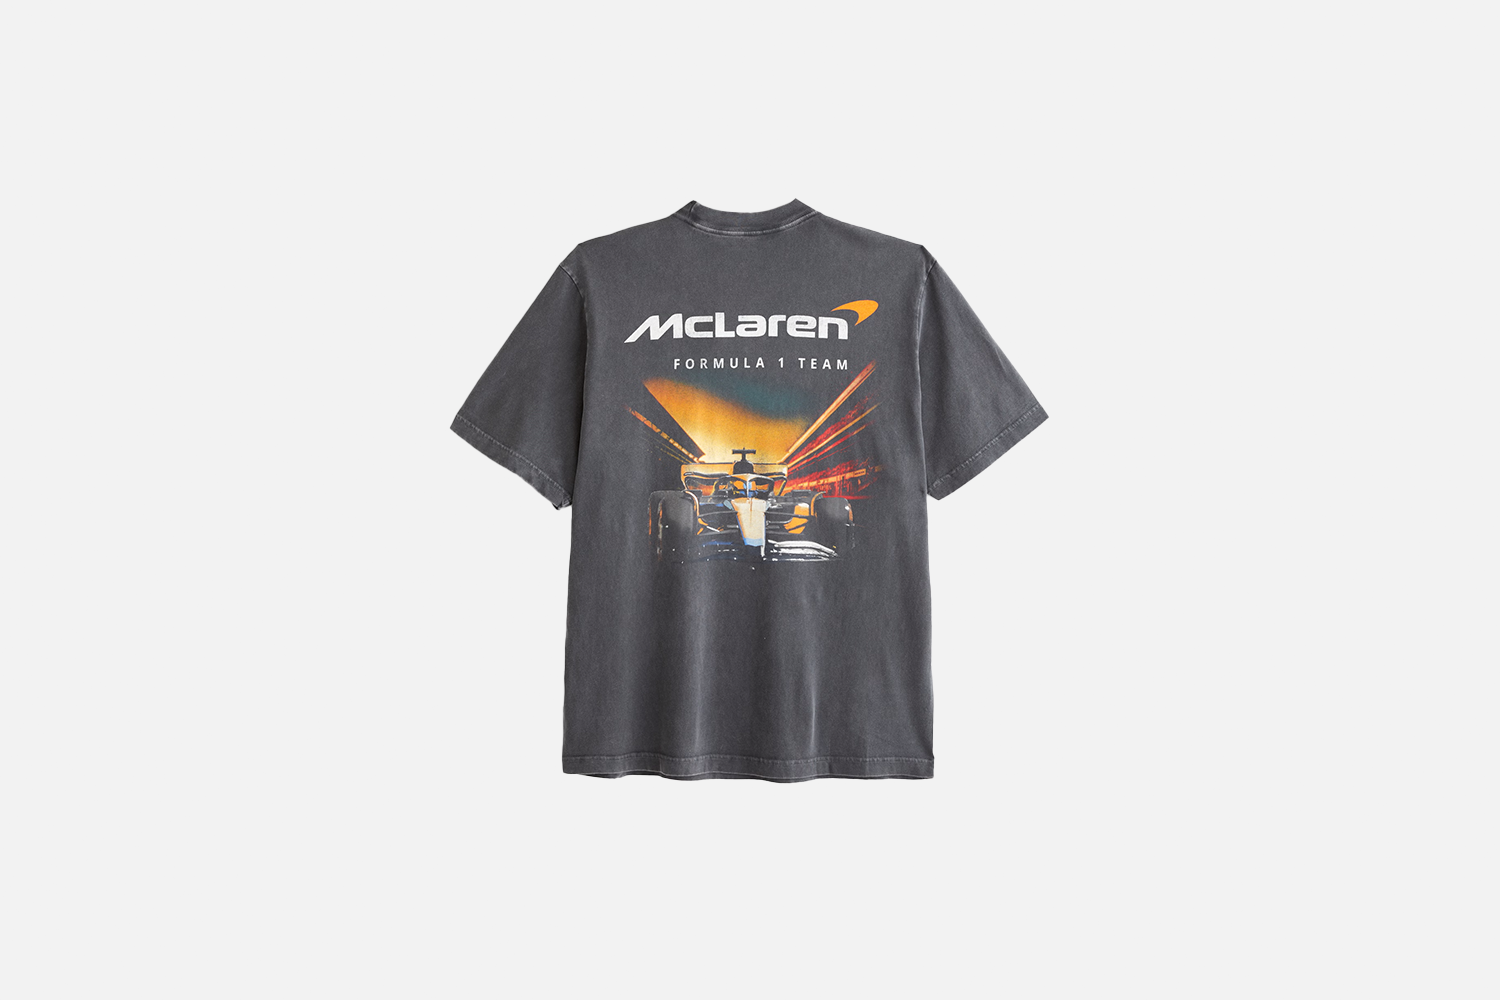 Abercrombie & Fitch McLaren Vintage-Inspired Graphic Tee